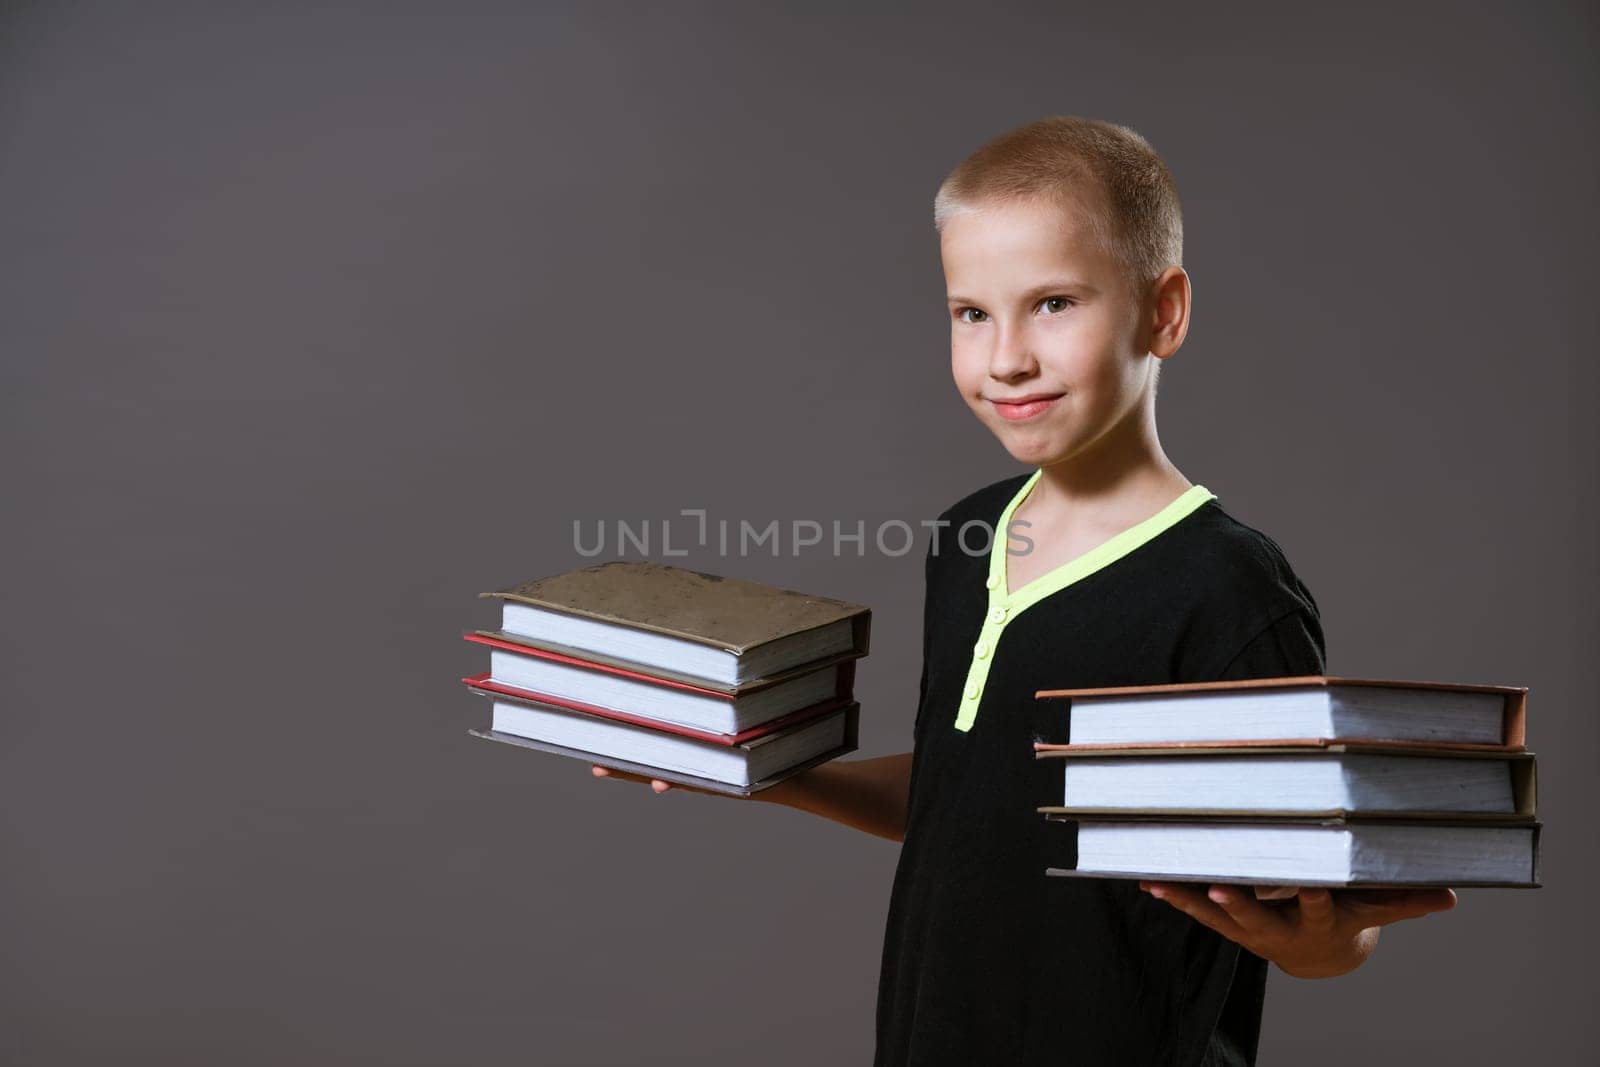 Cute boy in a black t-shirt holds stacks of books on a gray background